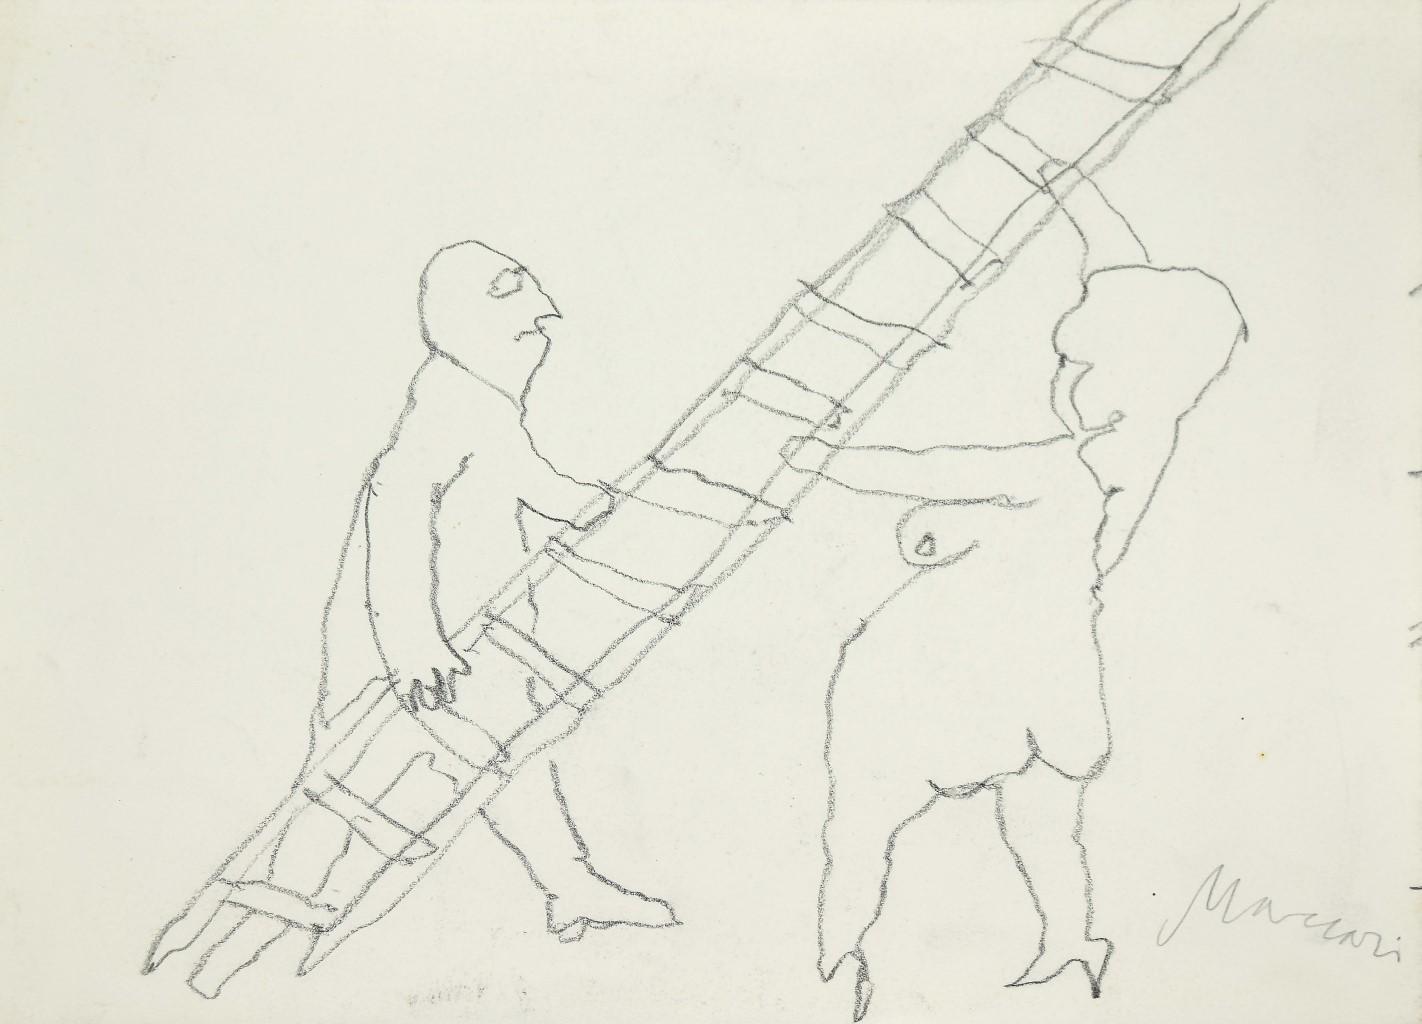 The Ladder is an original modern artwork realized the 1985s by the Italian artist Mino Maccari (Siena, 1898 - Rome, 1989).

Original pencil drawing on Ivory paper. 

Hand-signed in pencil by the artist on the lower right corner: Maccari.

Excellent